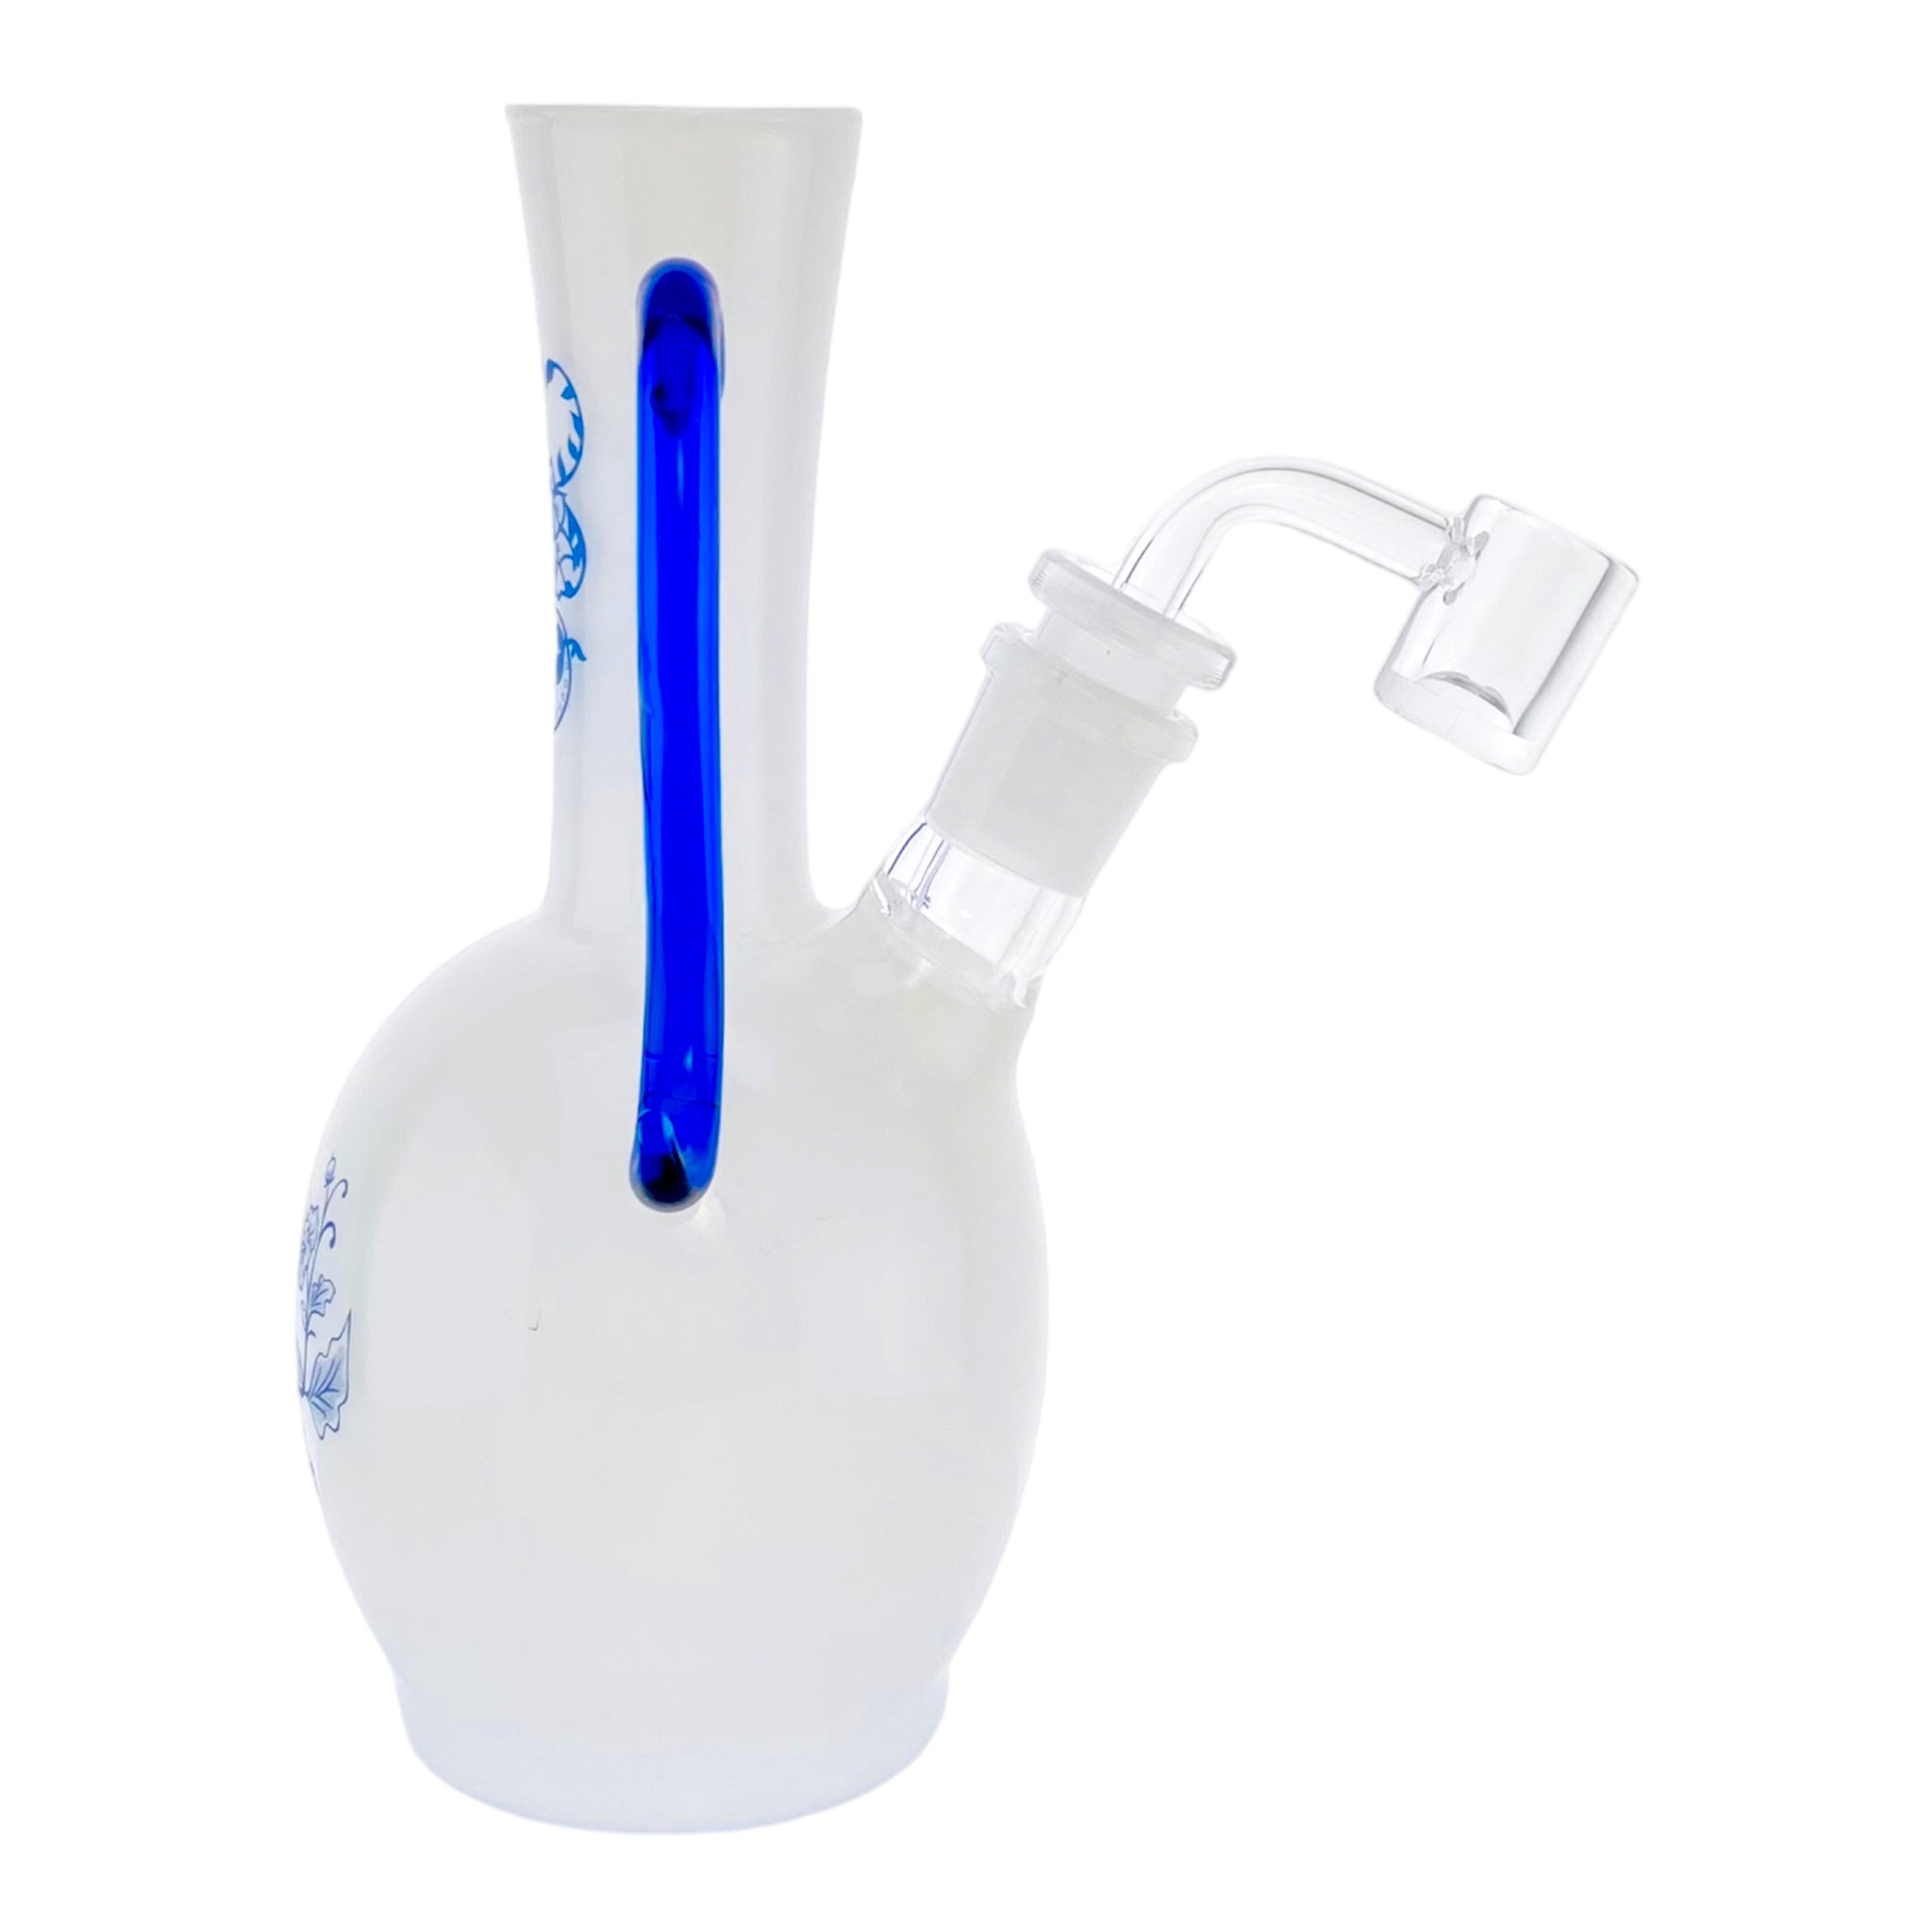 Decorative Vase Dab Rig made from white and blue glass